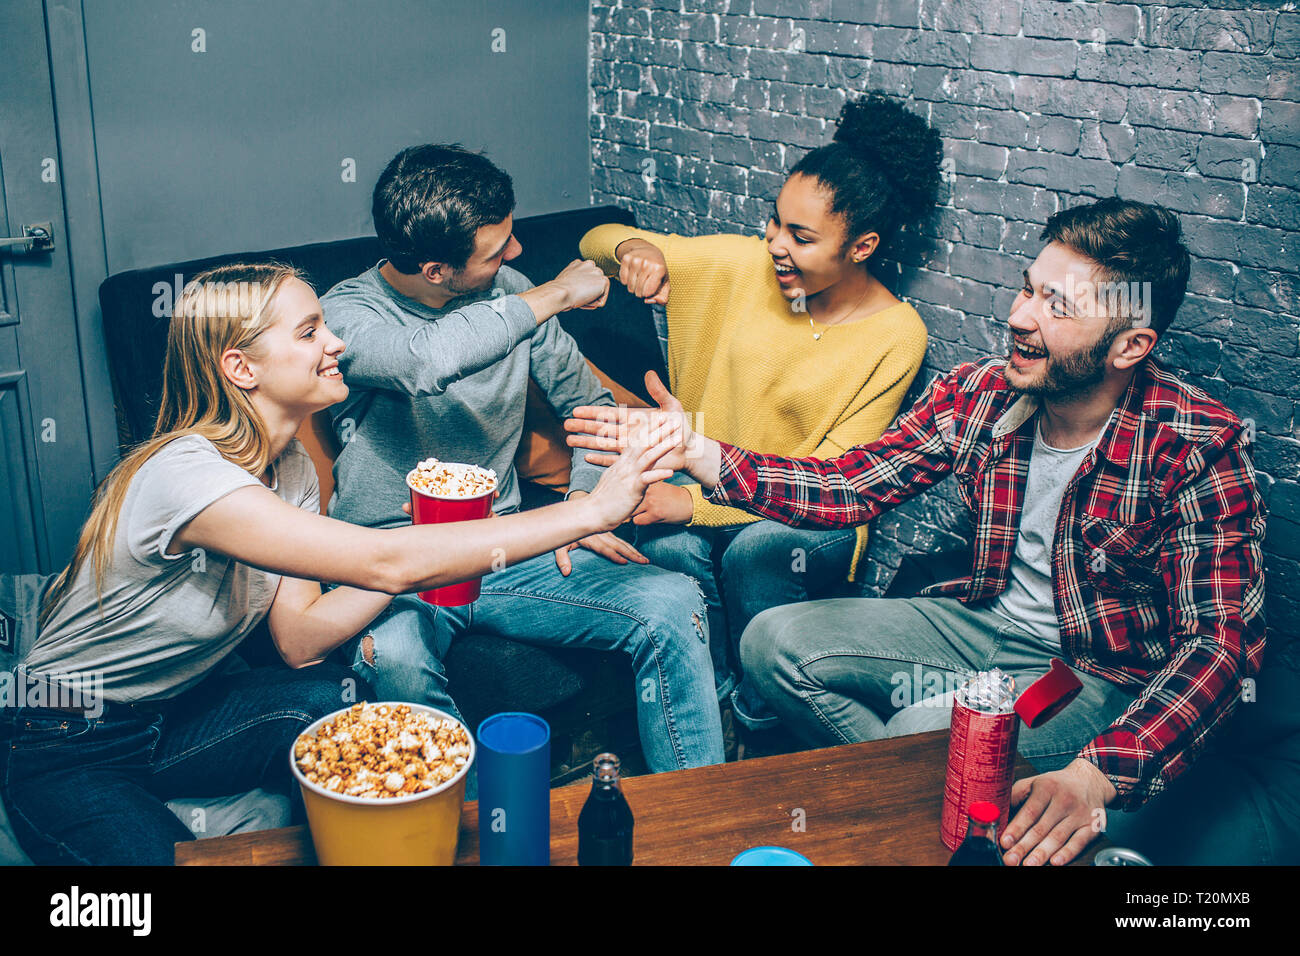 A picture of young boys and girls sitting together in a small room on couches and greeting each other. They got some popcorn and ready to play some gr Stock Photo